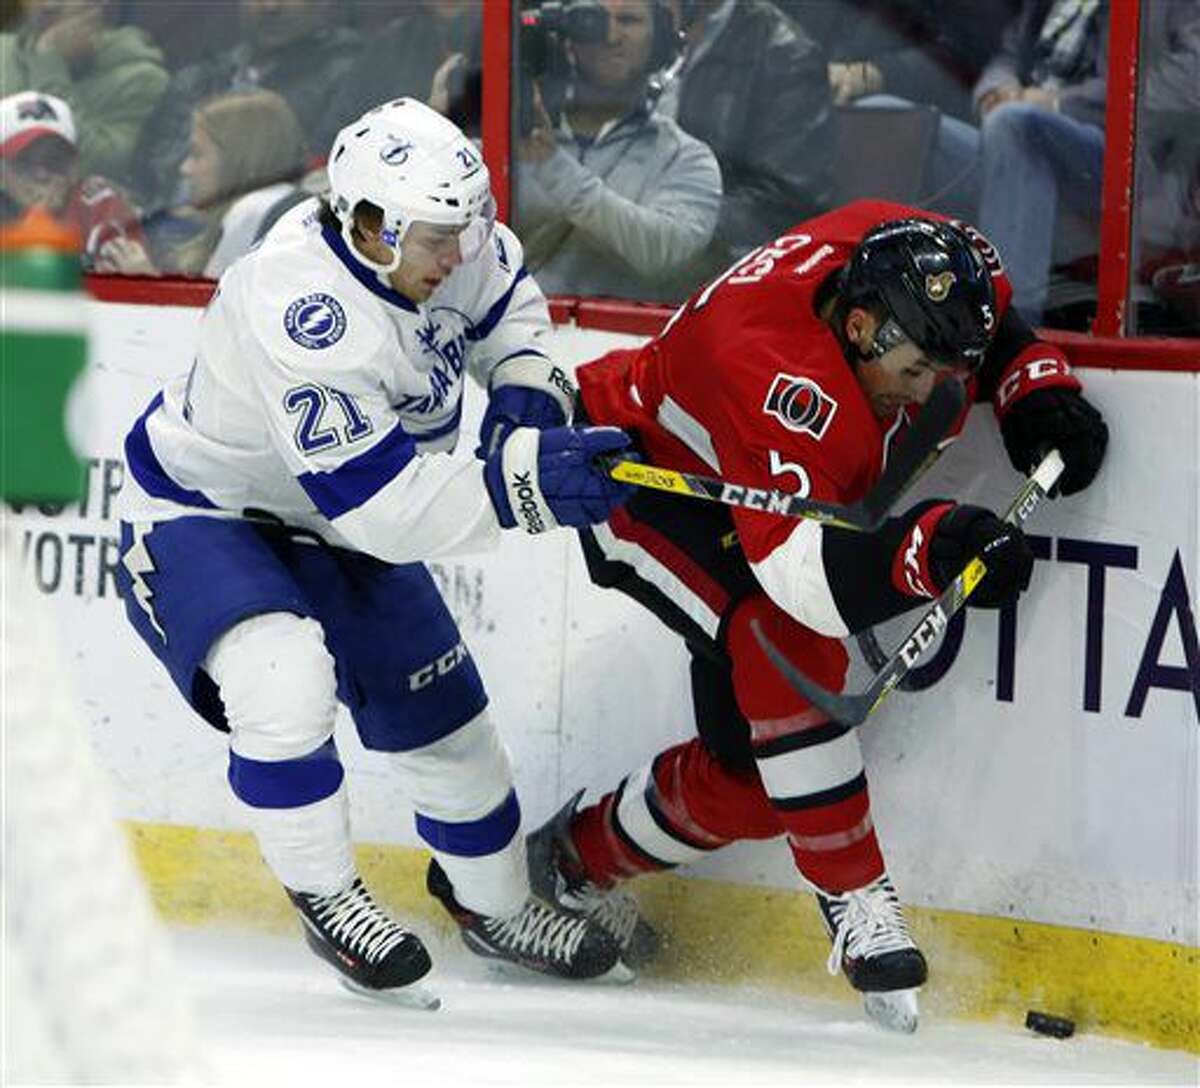 Ottawa Senators' Cody Ceci (5) and Tampa Bay Lighting's Brayden Point (21) vie for the puck during the first period of an NHL hockey game Saturday, Oct. 22, 2016, in Ottawa, Ontario. (Fred Chartrand/The Canadian Press via AP)